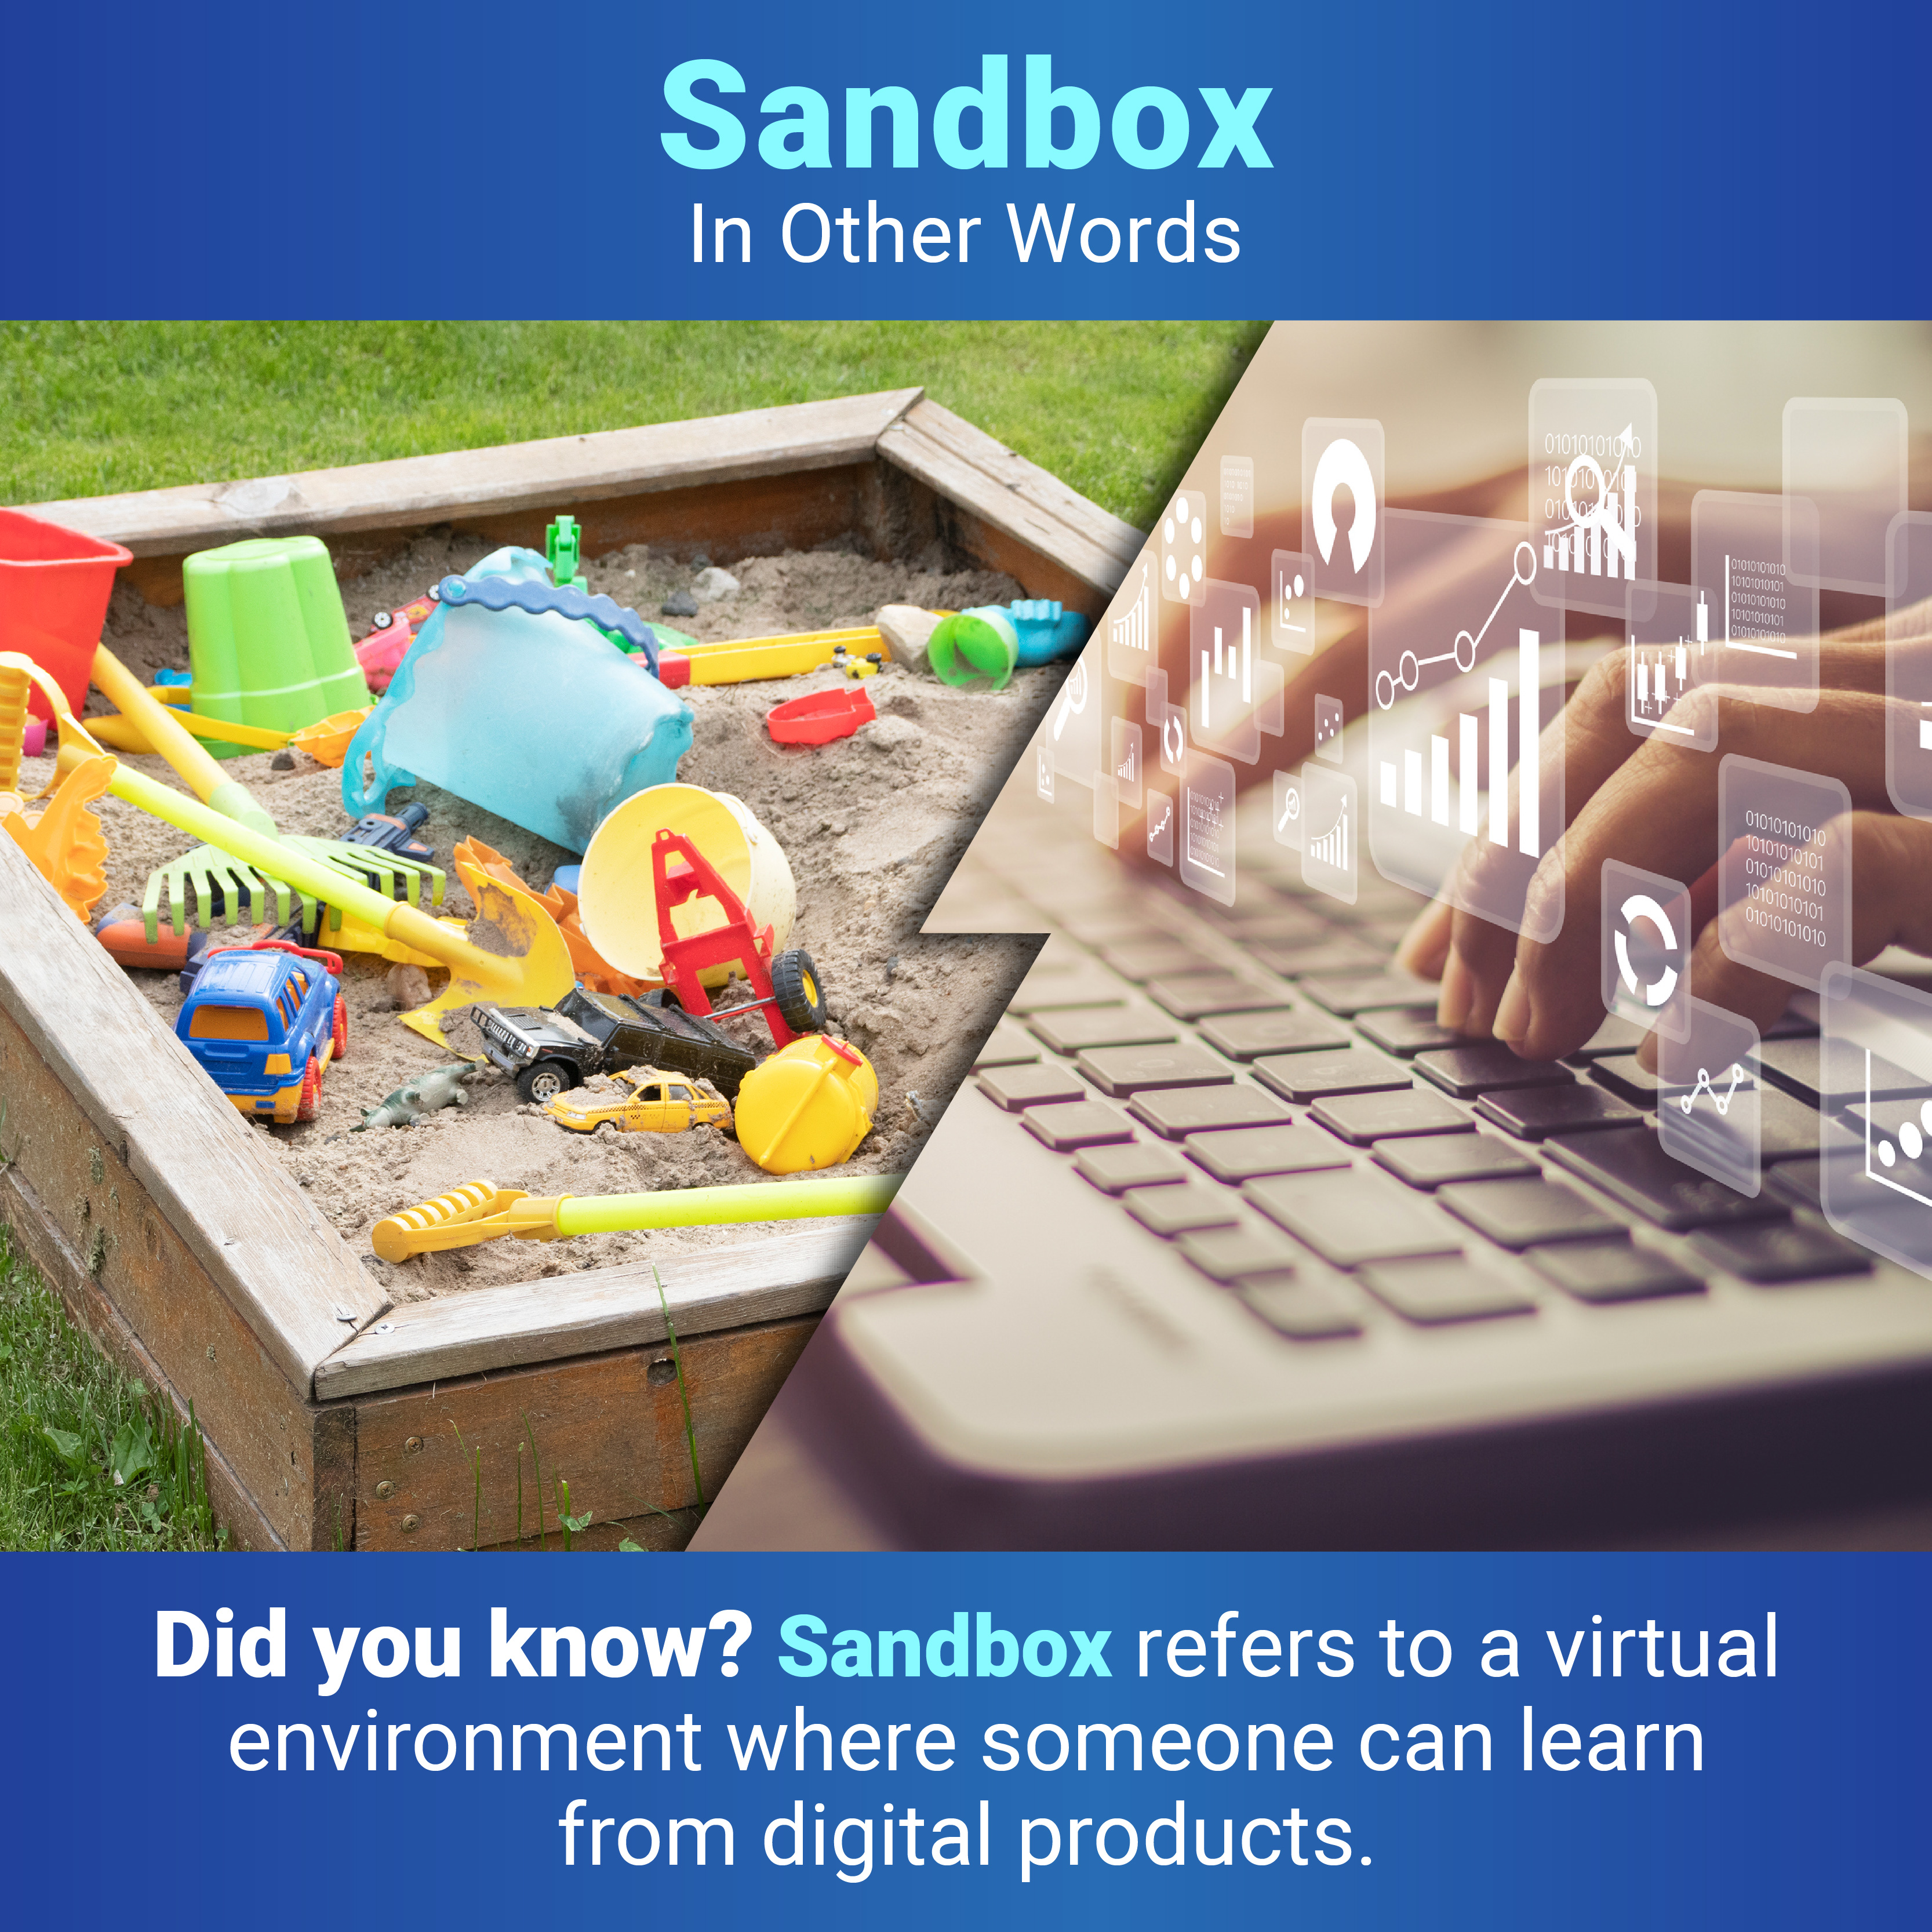 Below the title, Sandbox: In Other Words, two images are separated by a jagged line. On the left is a picture of a physical sandbox with shovels, buckets, and other toys in the sand. On the right is a keyboard with hands typing and icons of data symbols floating above. Under the images, text reads: Did you know? Sandbox refers to a virtual environment where someone can learn from digital products.